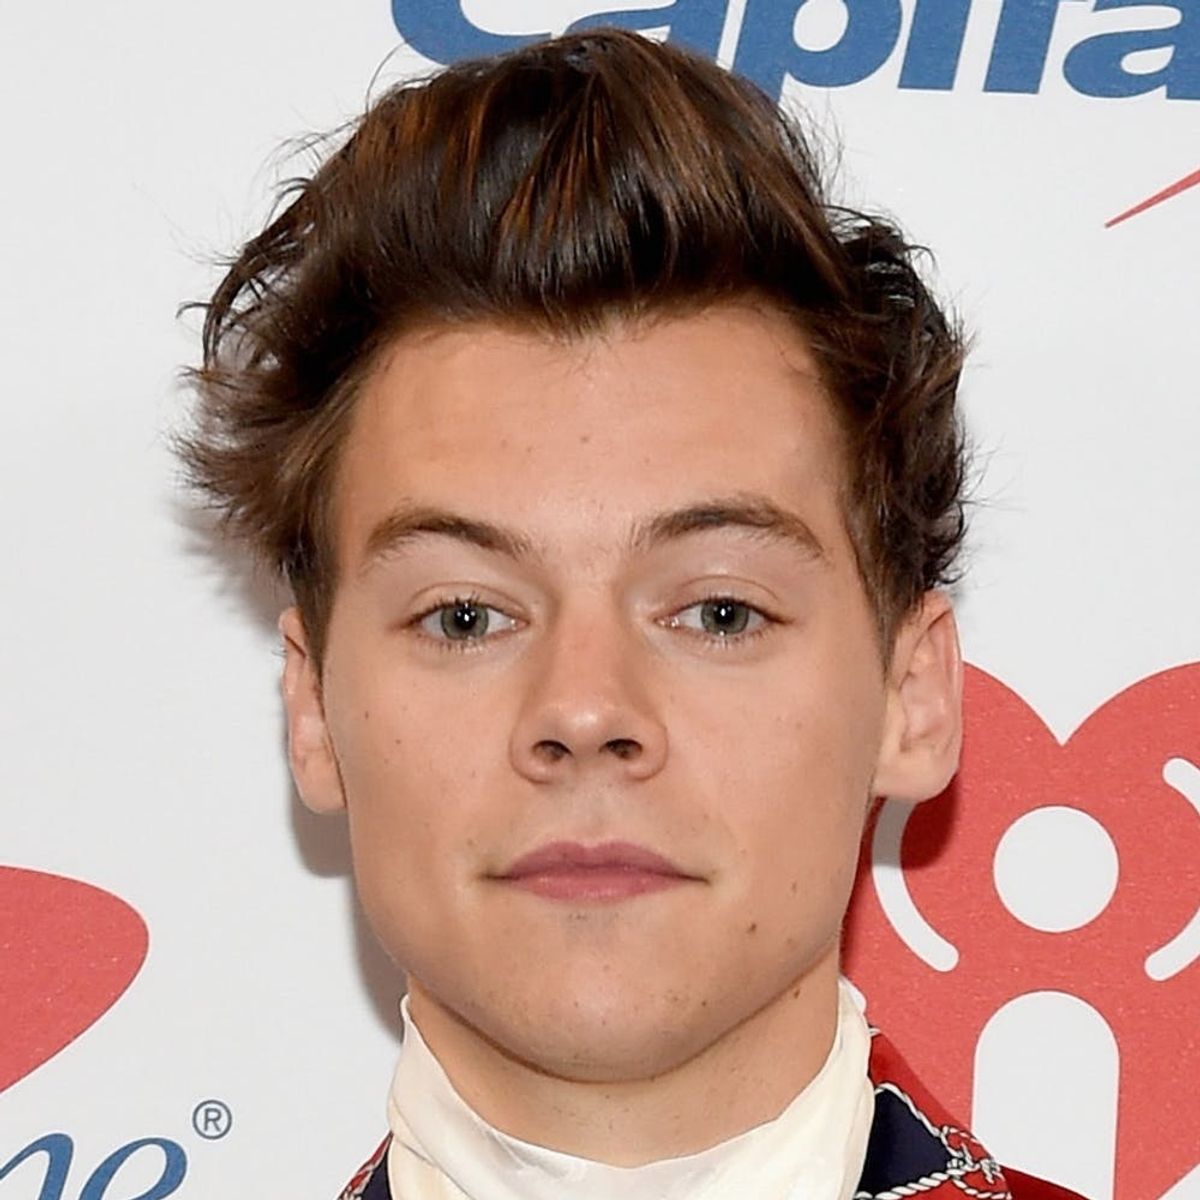 Harry Styles Was Grabbed Inappropriately by a Fan and Twitter Is Absolutely Furious